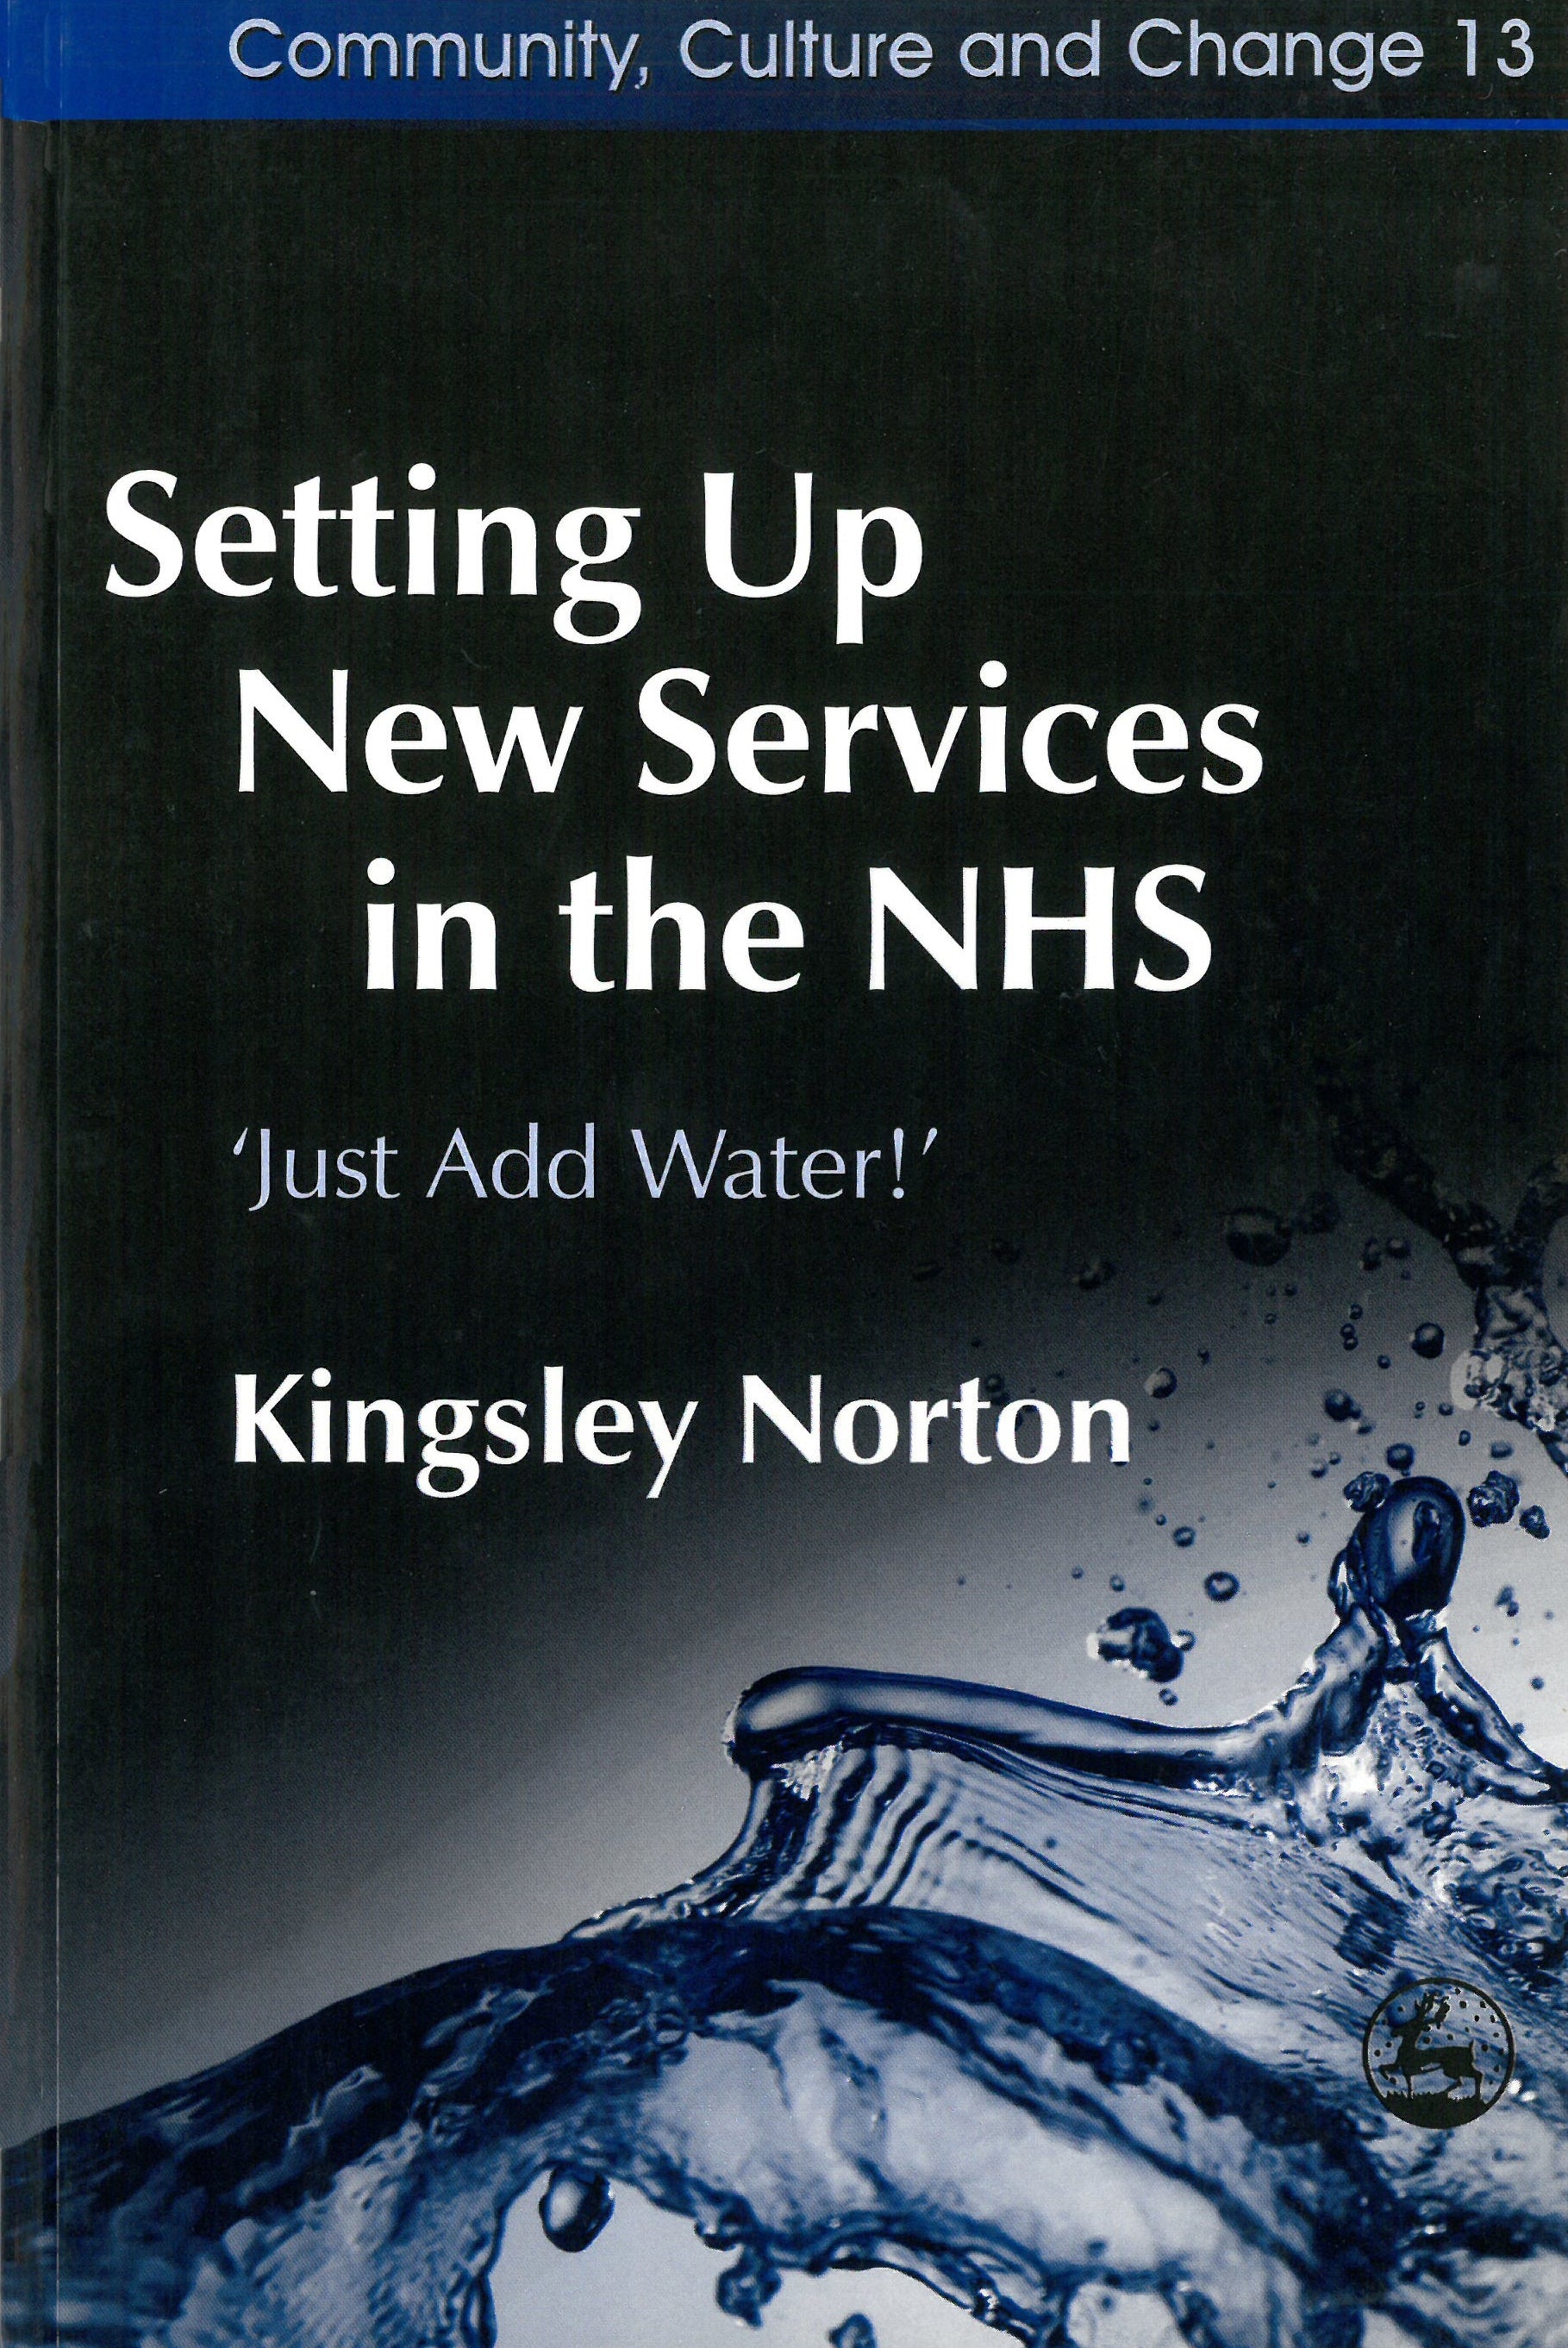 Setting Up New Services in the NHS by Kingsley Norton